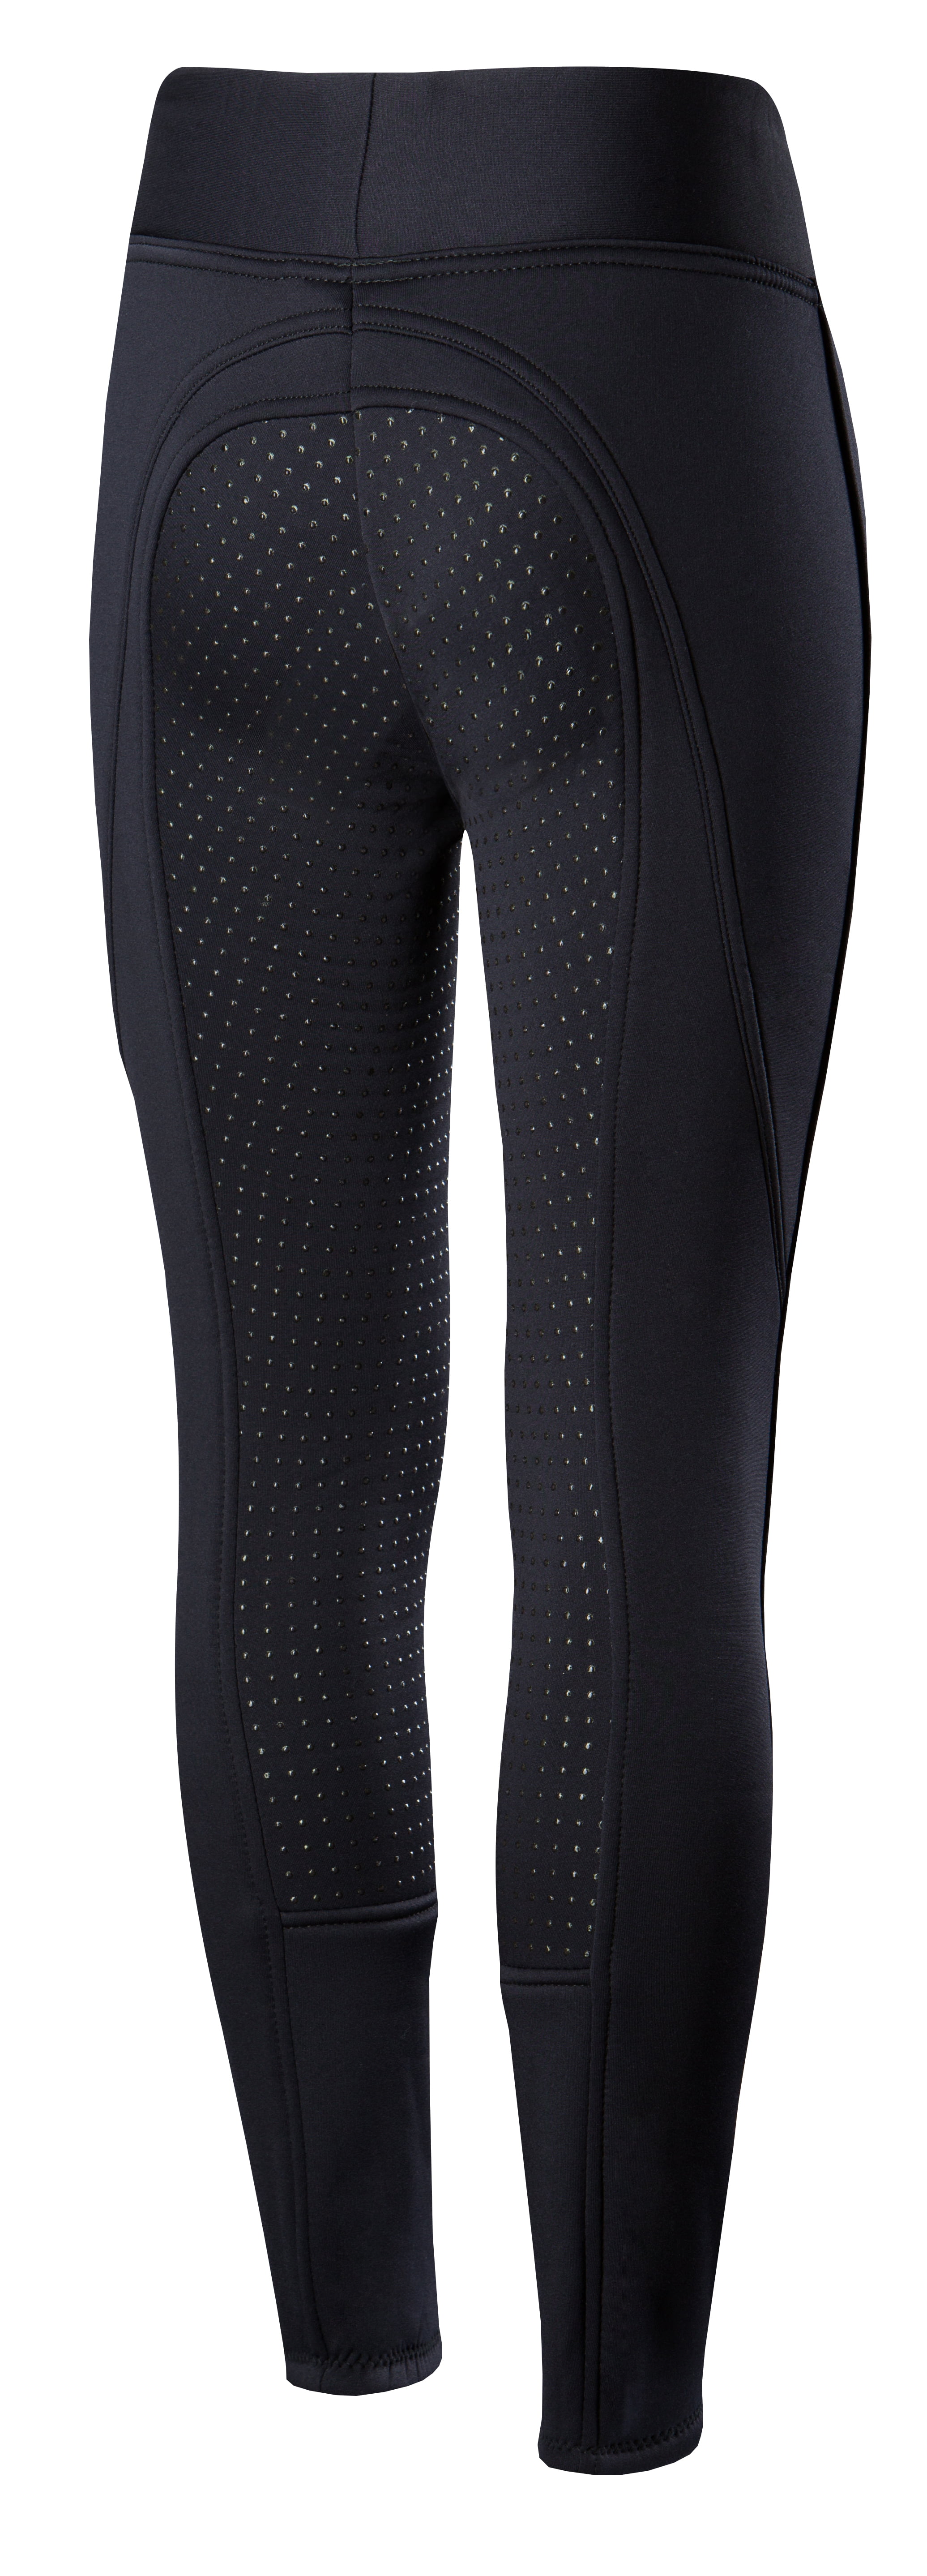 Elico Madison Stretch Riding Tights Leggings High Waist Ladies FREE Delivery 